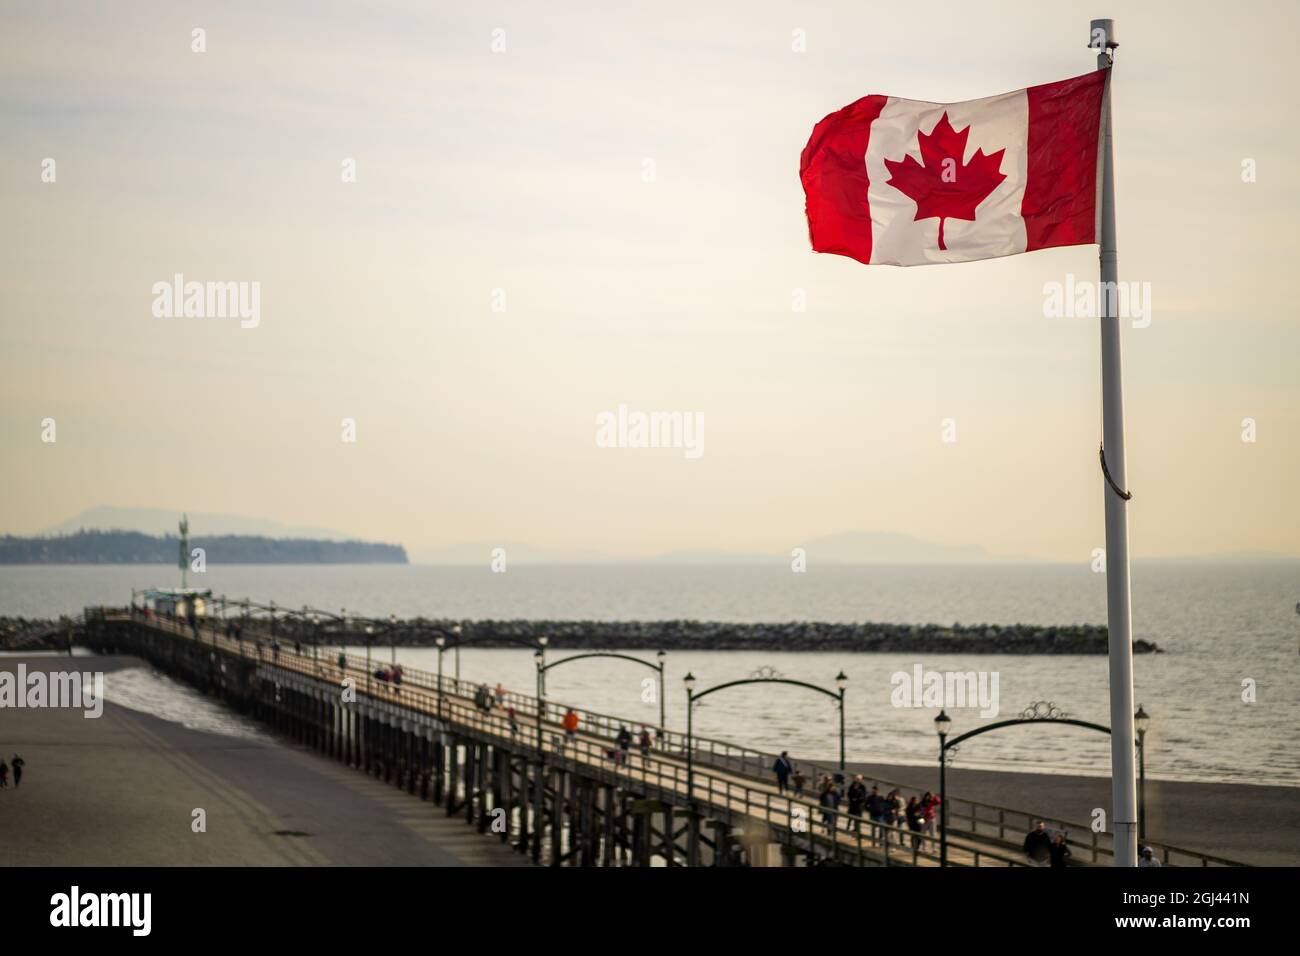 White Rock city pier in the dusk with flying Flag of Canada, British Columbia, Canada. Stock Photo